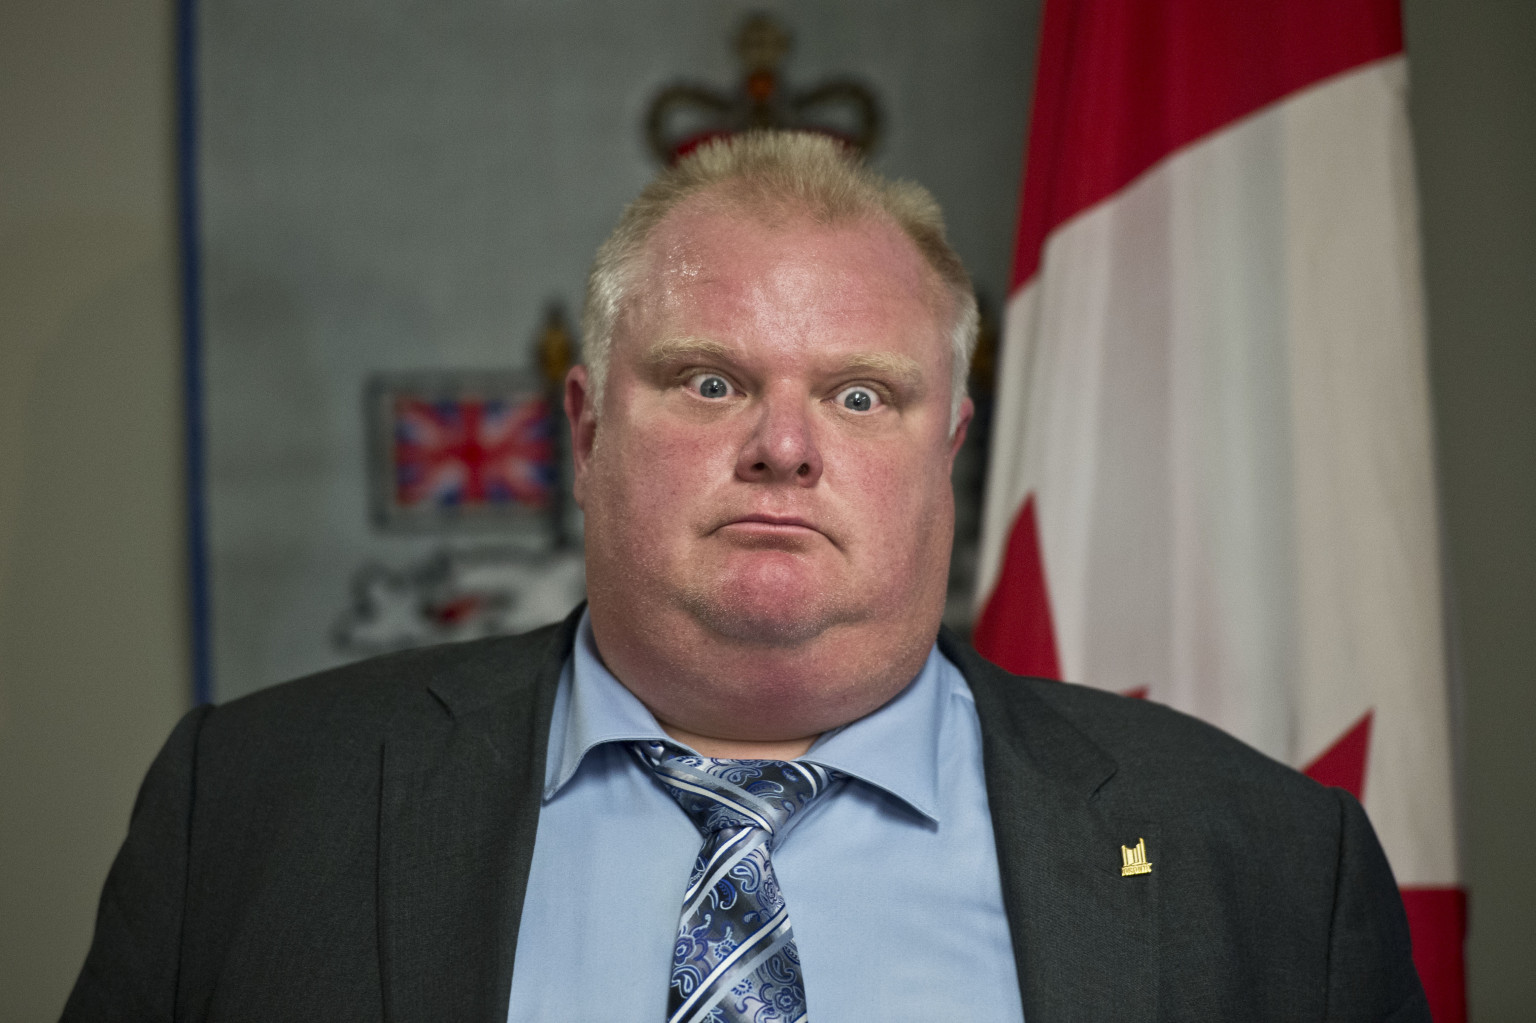 TORONTO, ON - JUNE 21: Toronto Mayor Rob Ford held a press conference at City Hall Friday afternoon in response to possible provincial funding cuts to the city. (Lucas Oleniuk/Toronto Star via Getty Images)